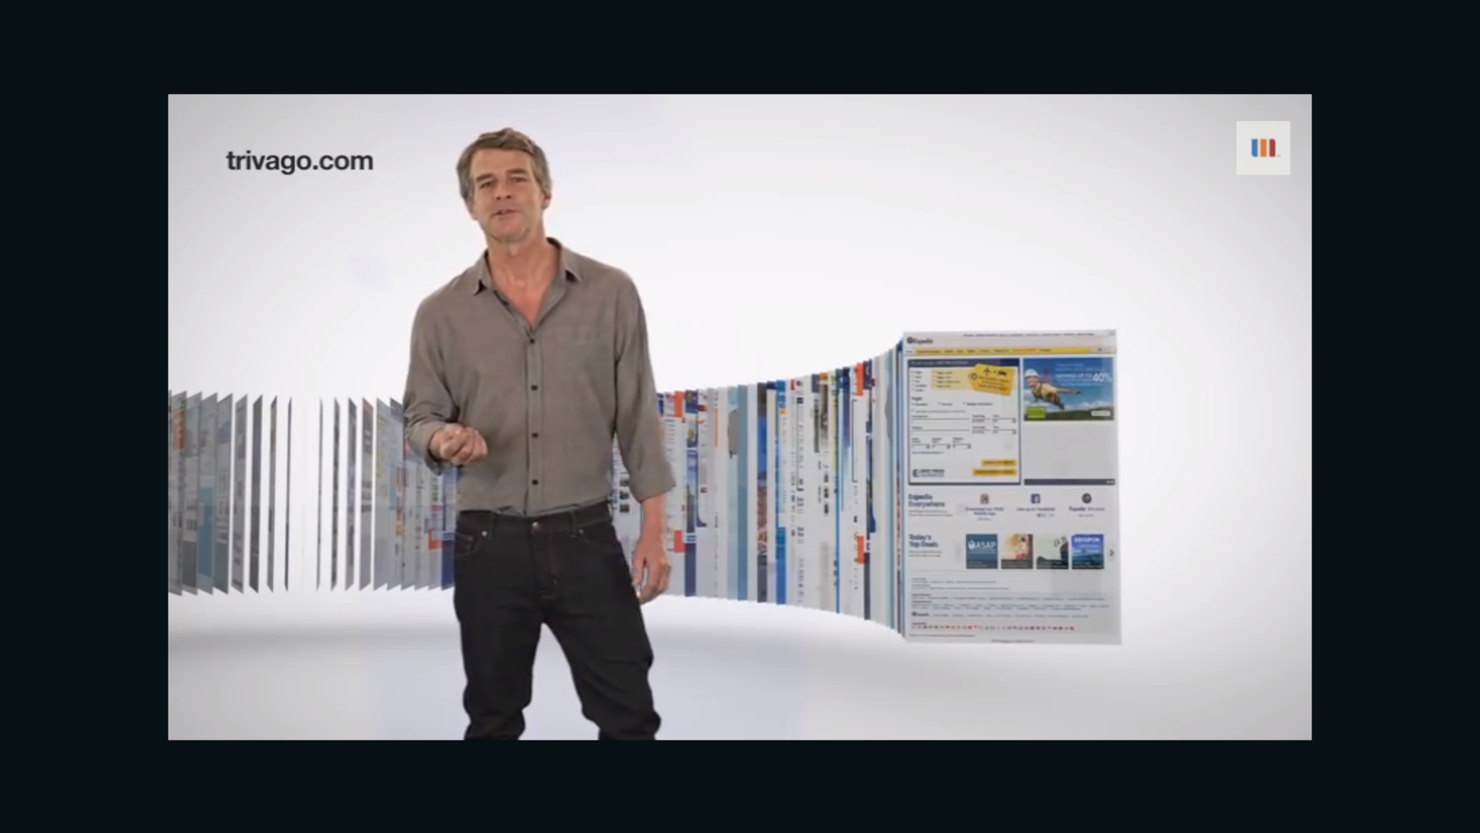 "Trivago Guy" Tim Williams used to look like this in his ads for the travel website.